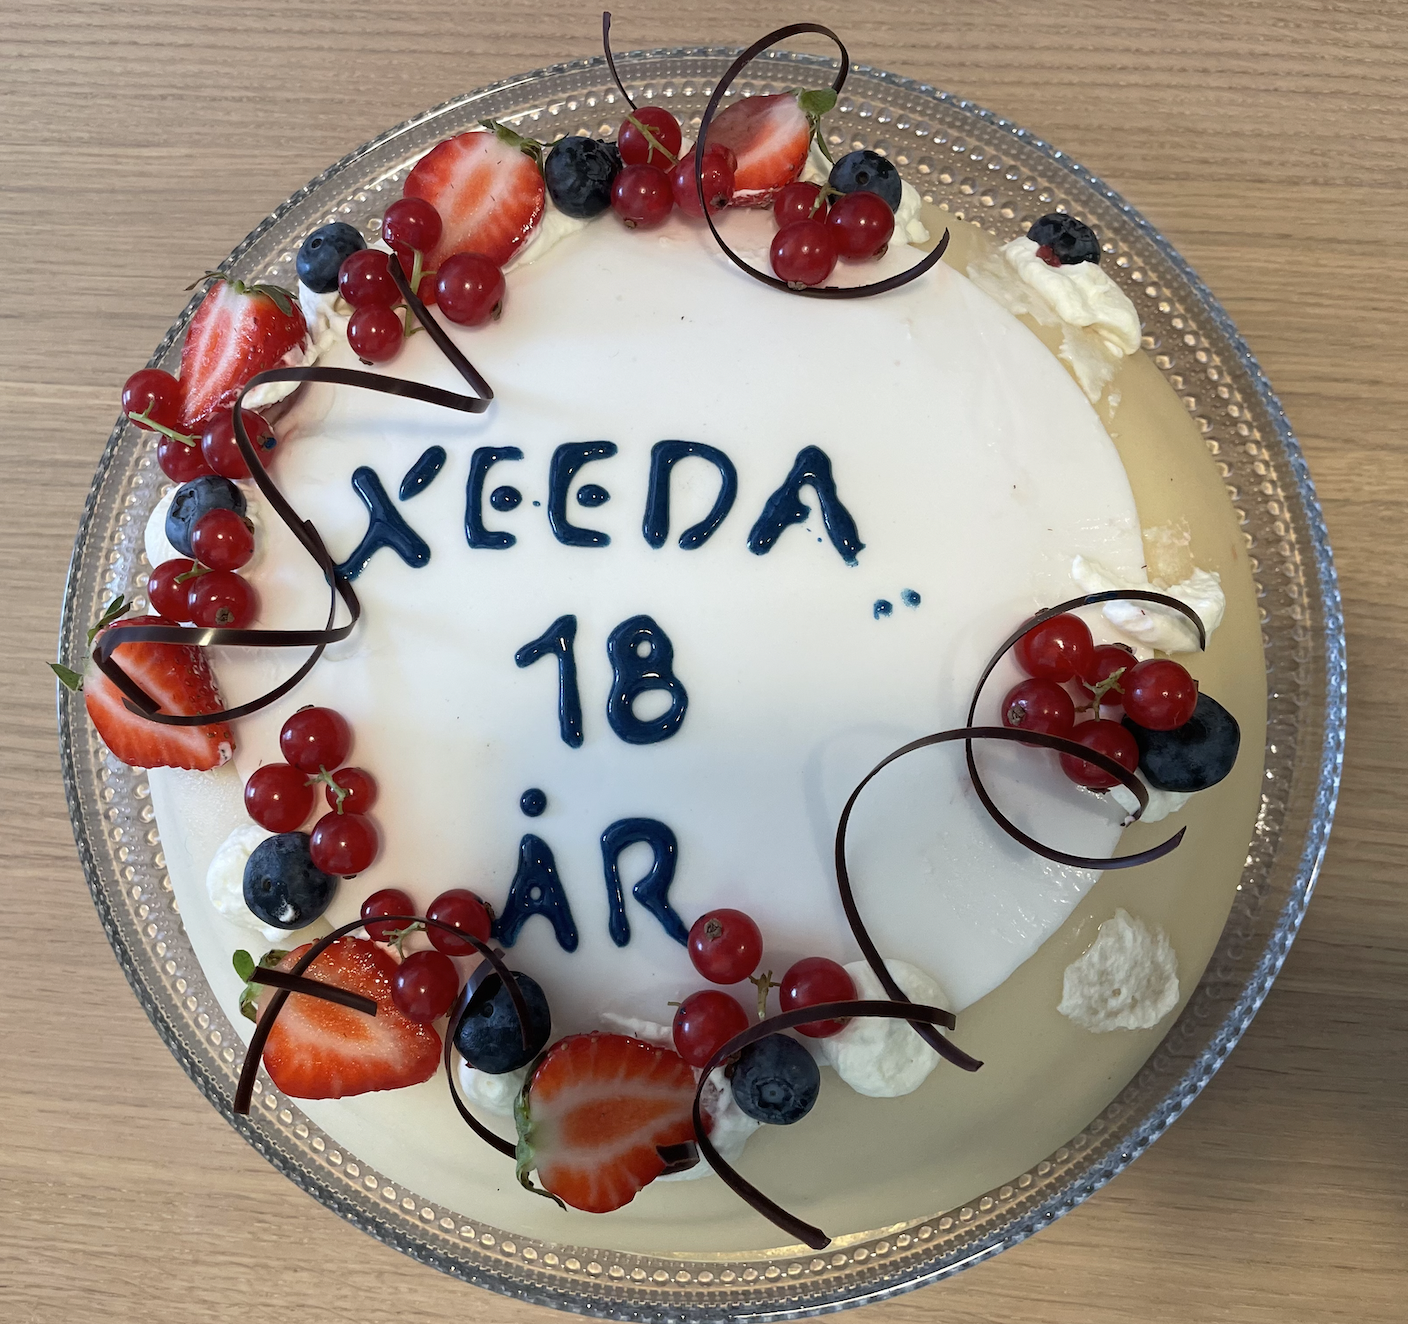 You are currently viewing Xeeda 18 år!